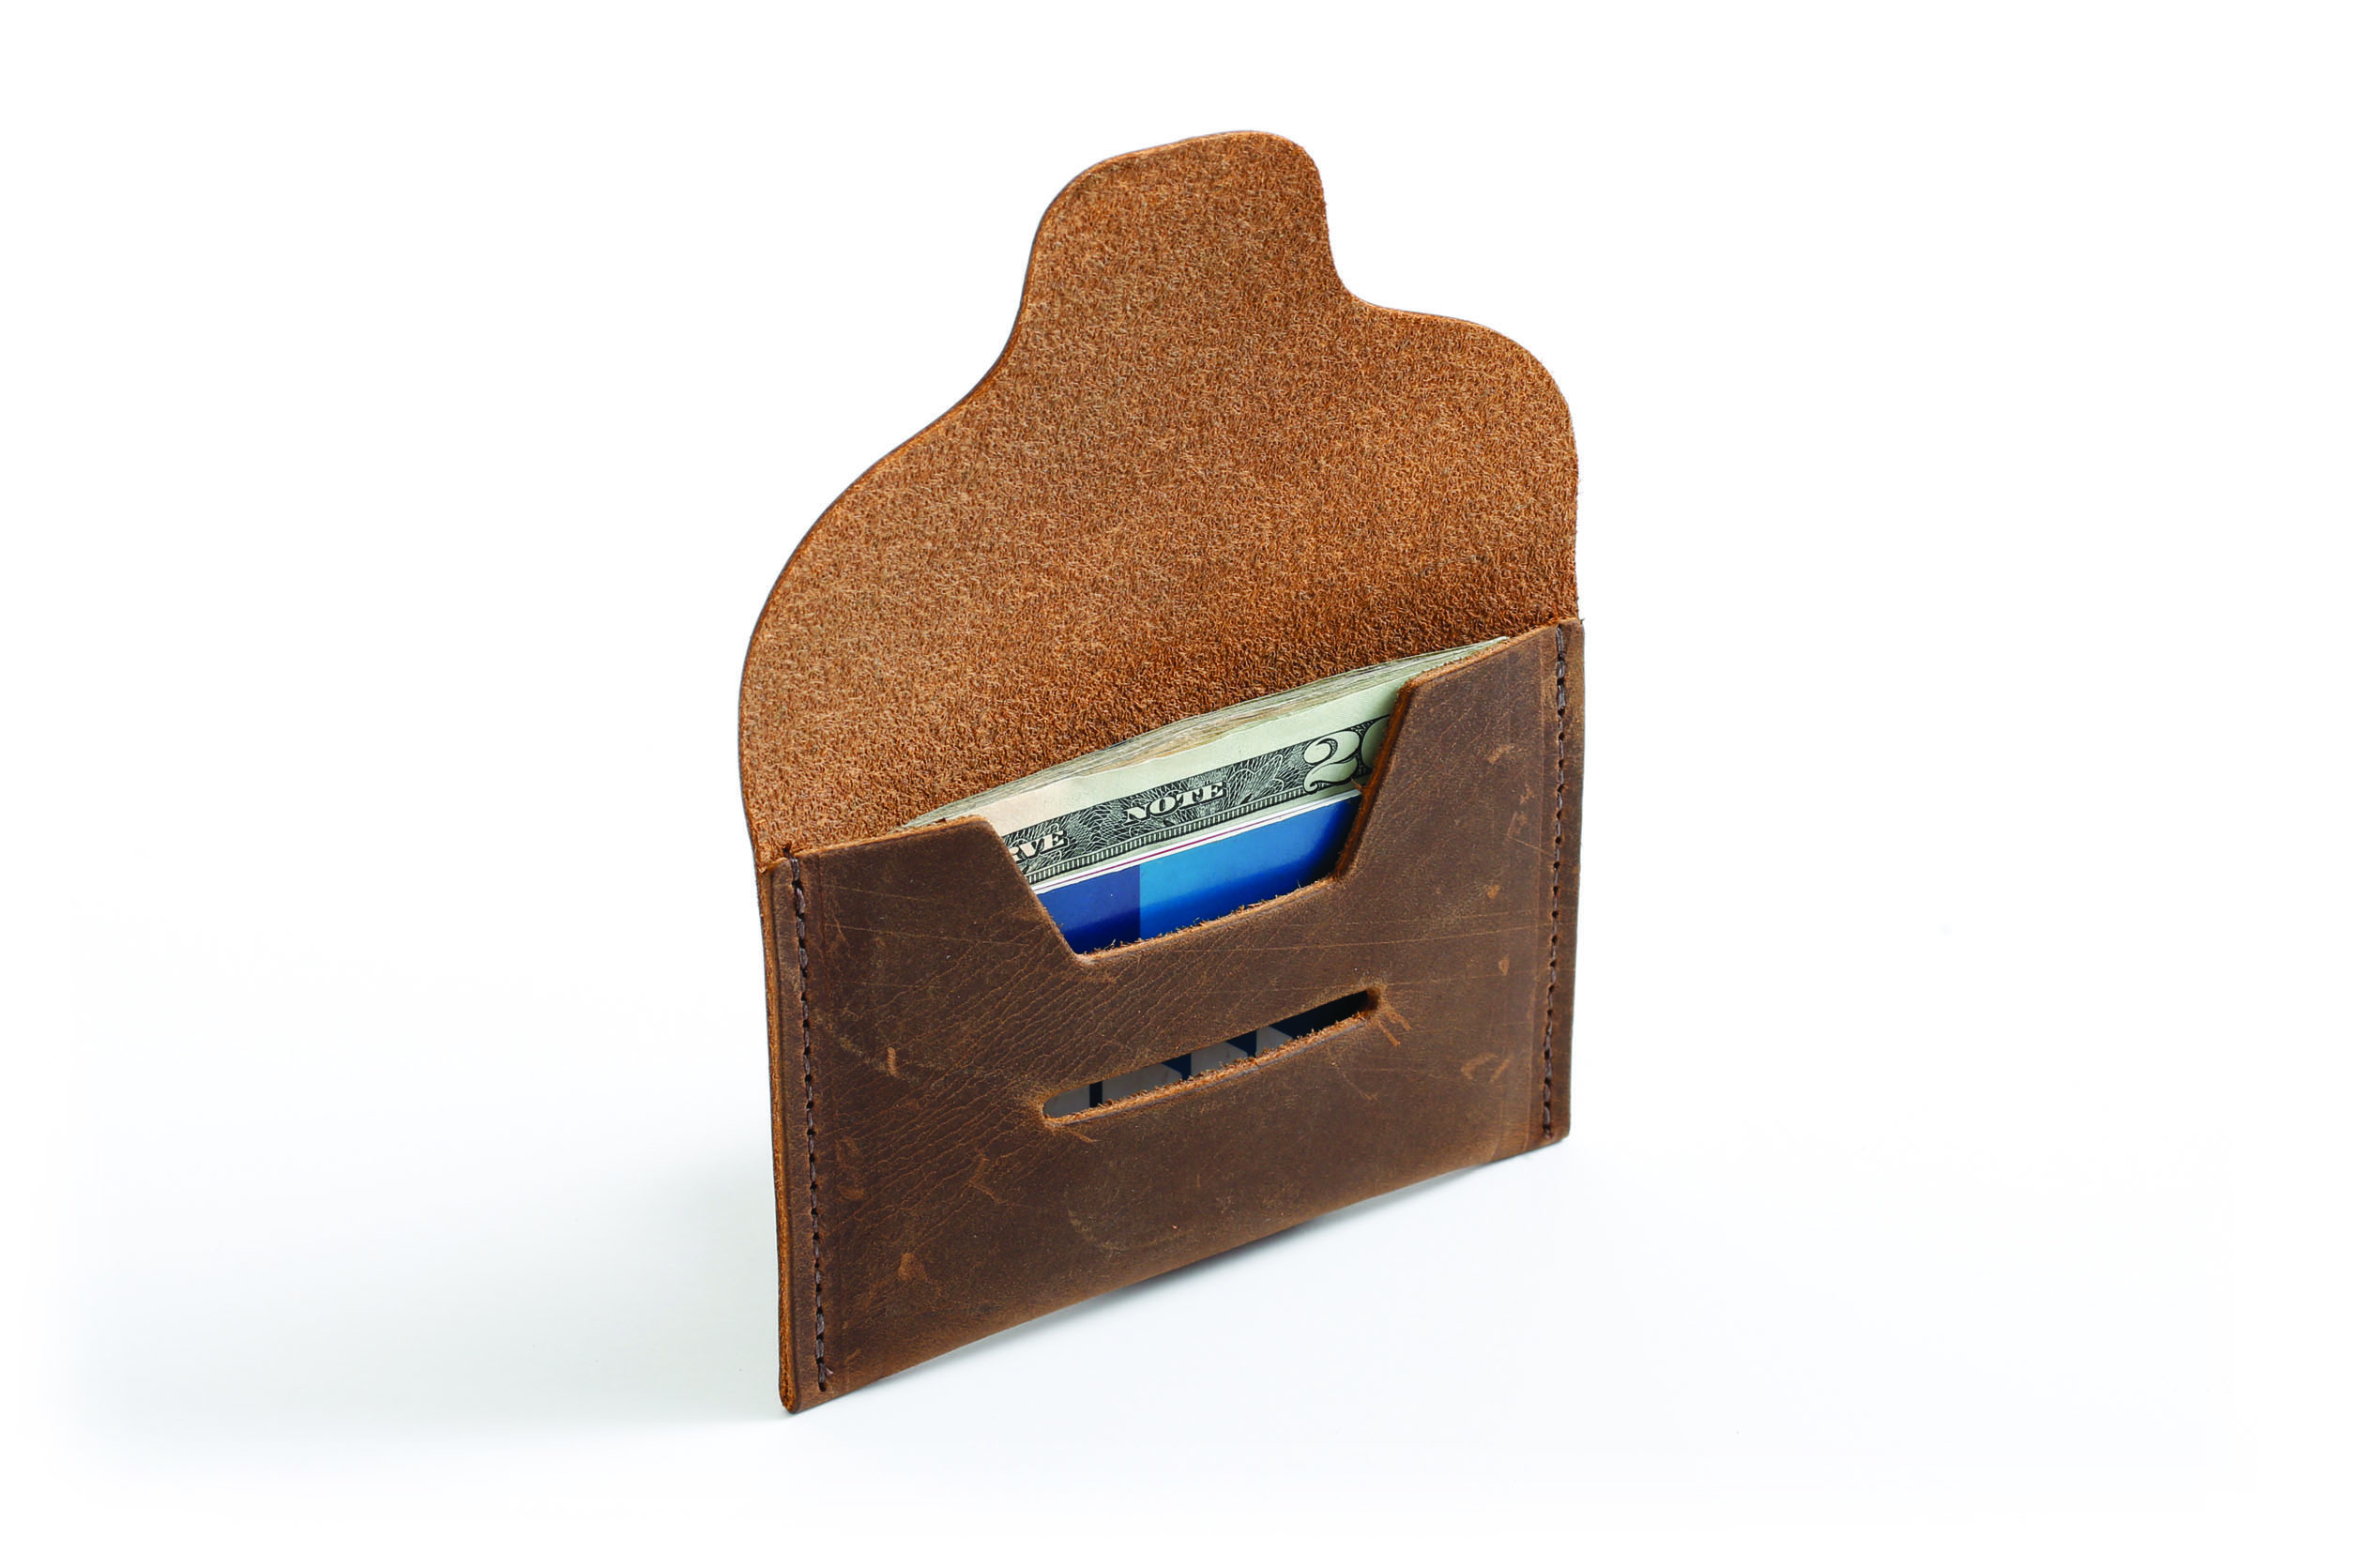 The Spike Wallet